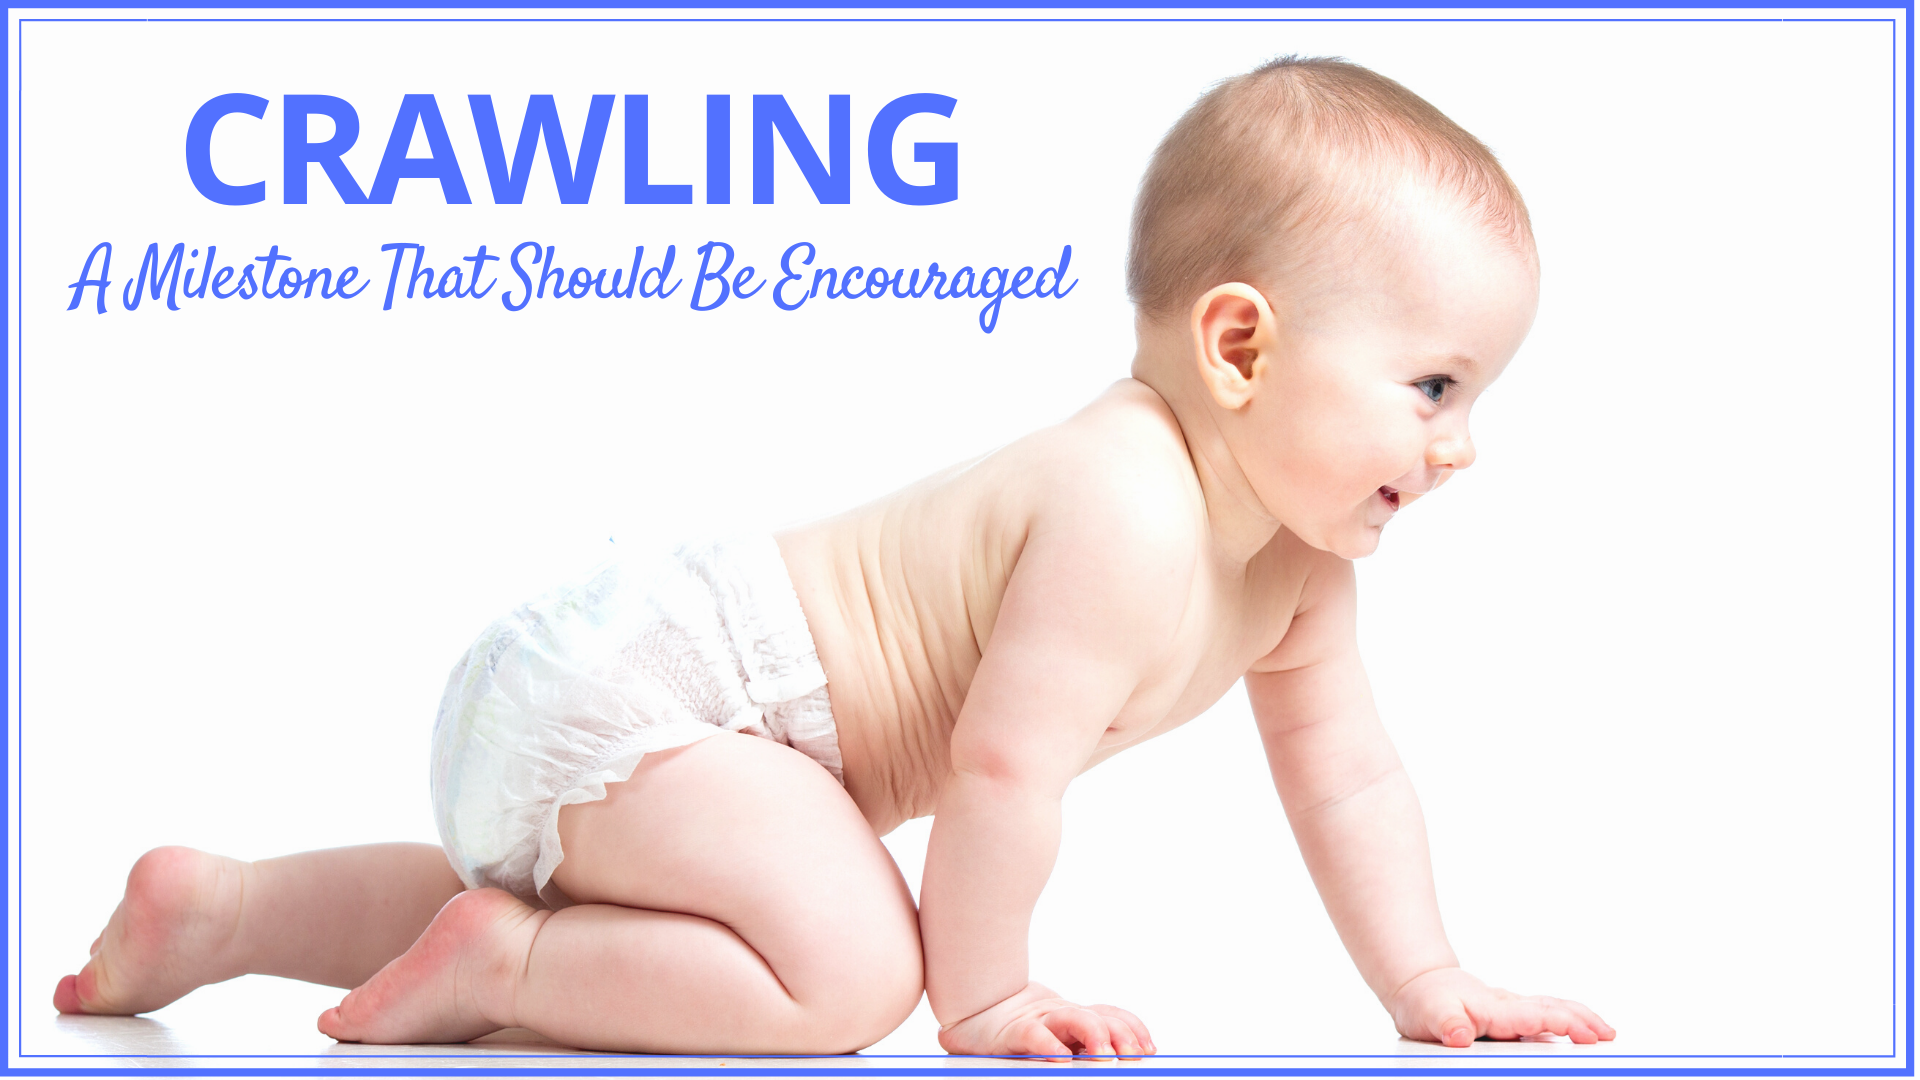 Crawling:  A Milestone That Should Be Encouraged